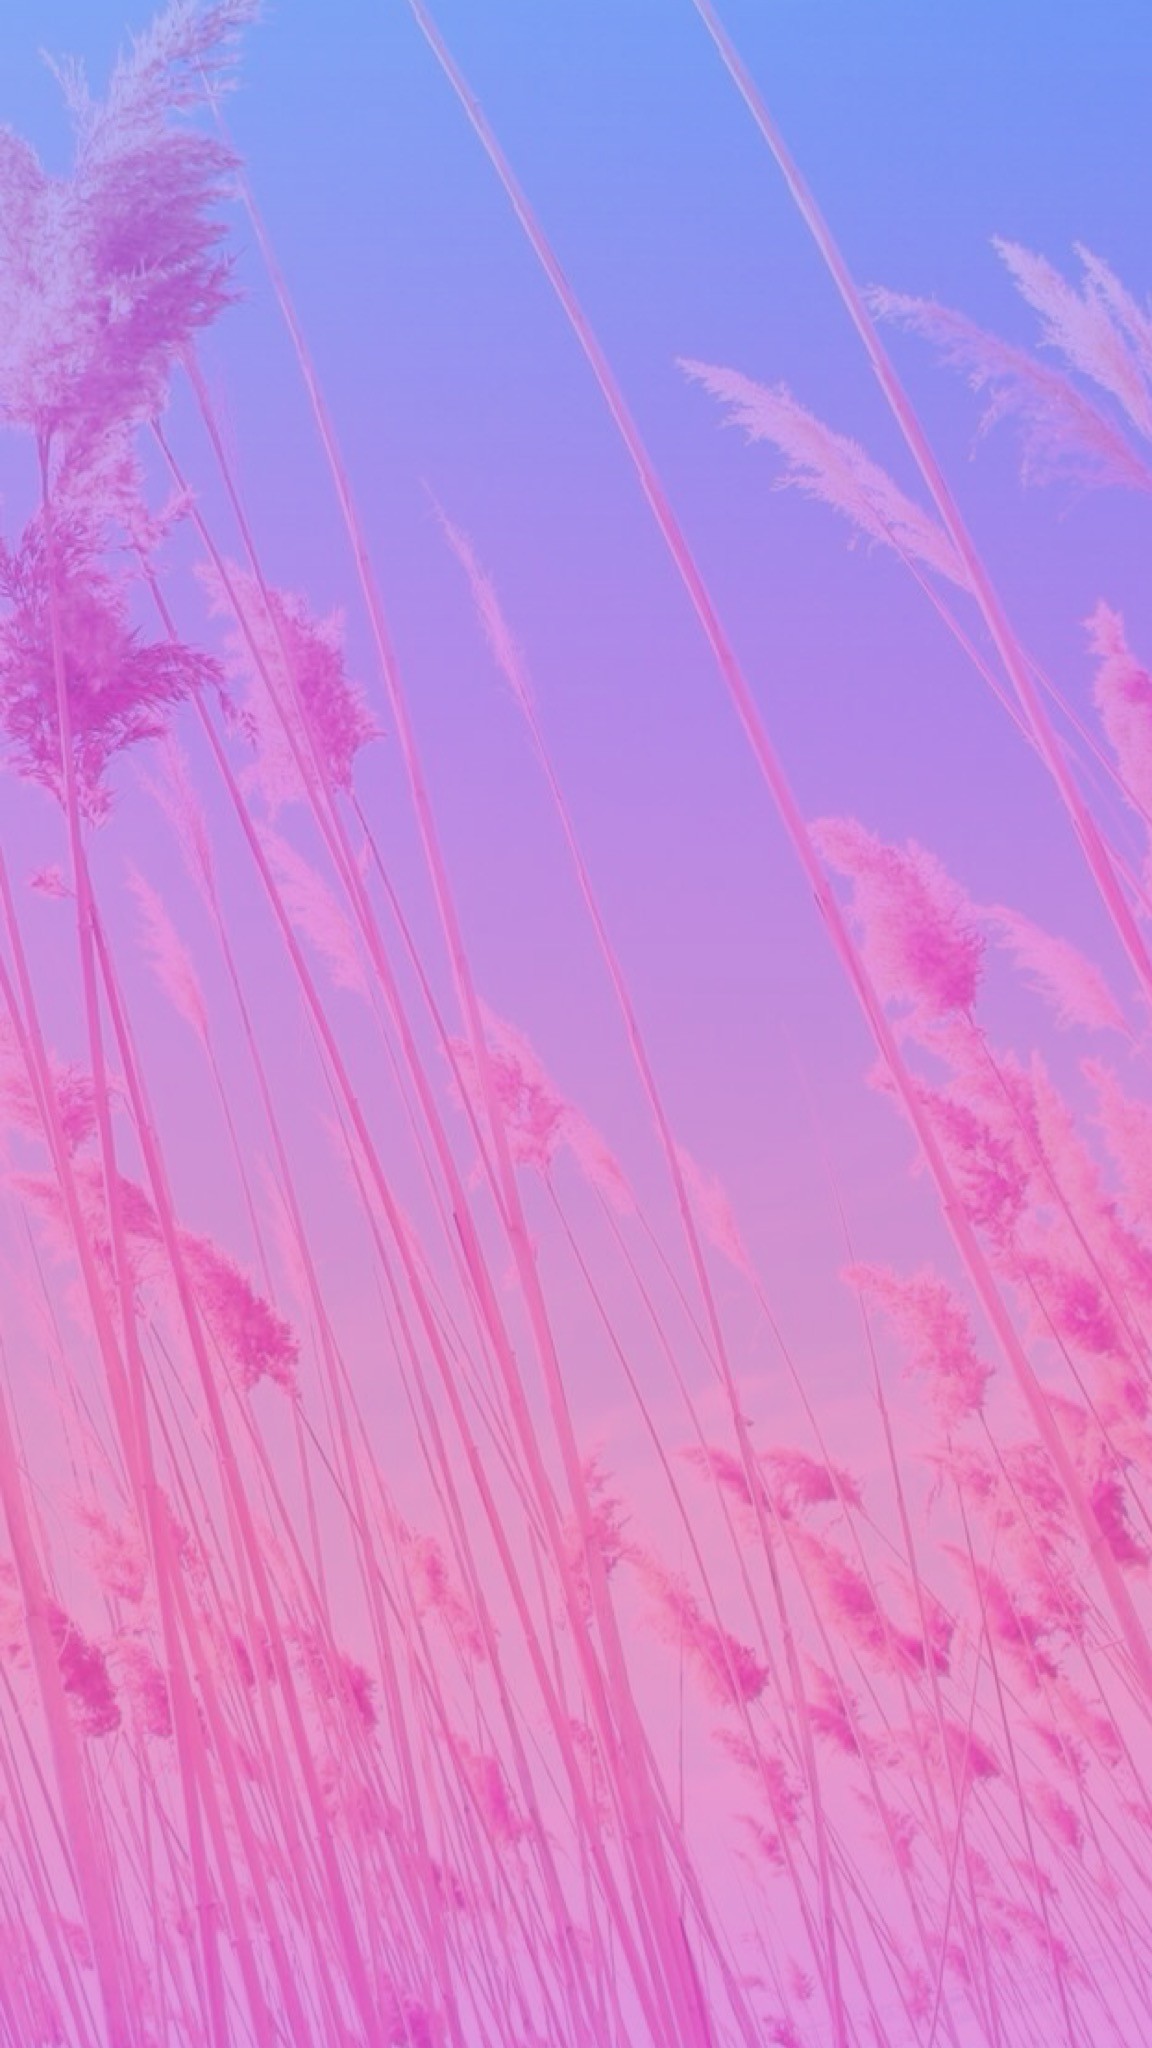 Wallpaper backgrounds Â· Original image not by me! I just made the ombrÃ©/gradient.  Pink,